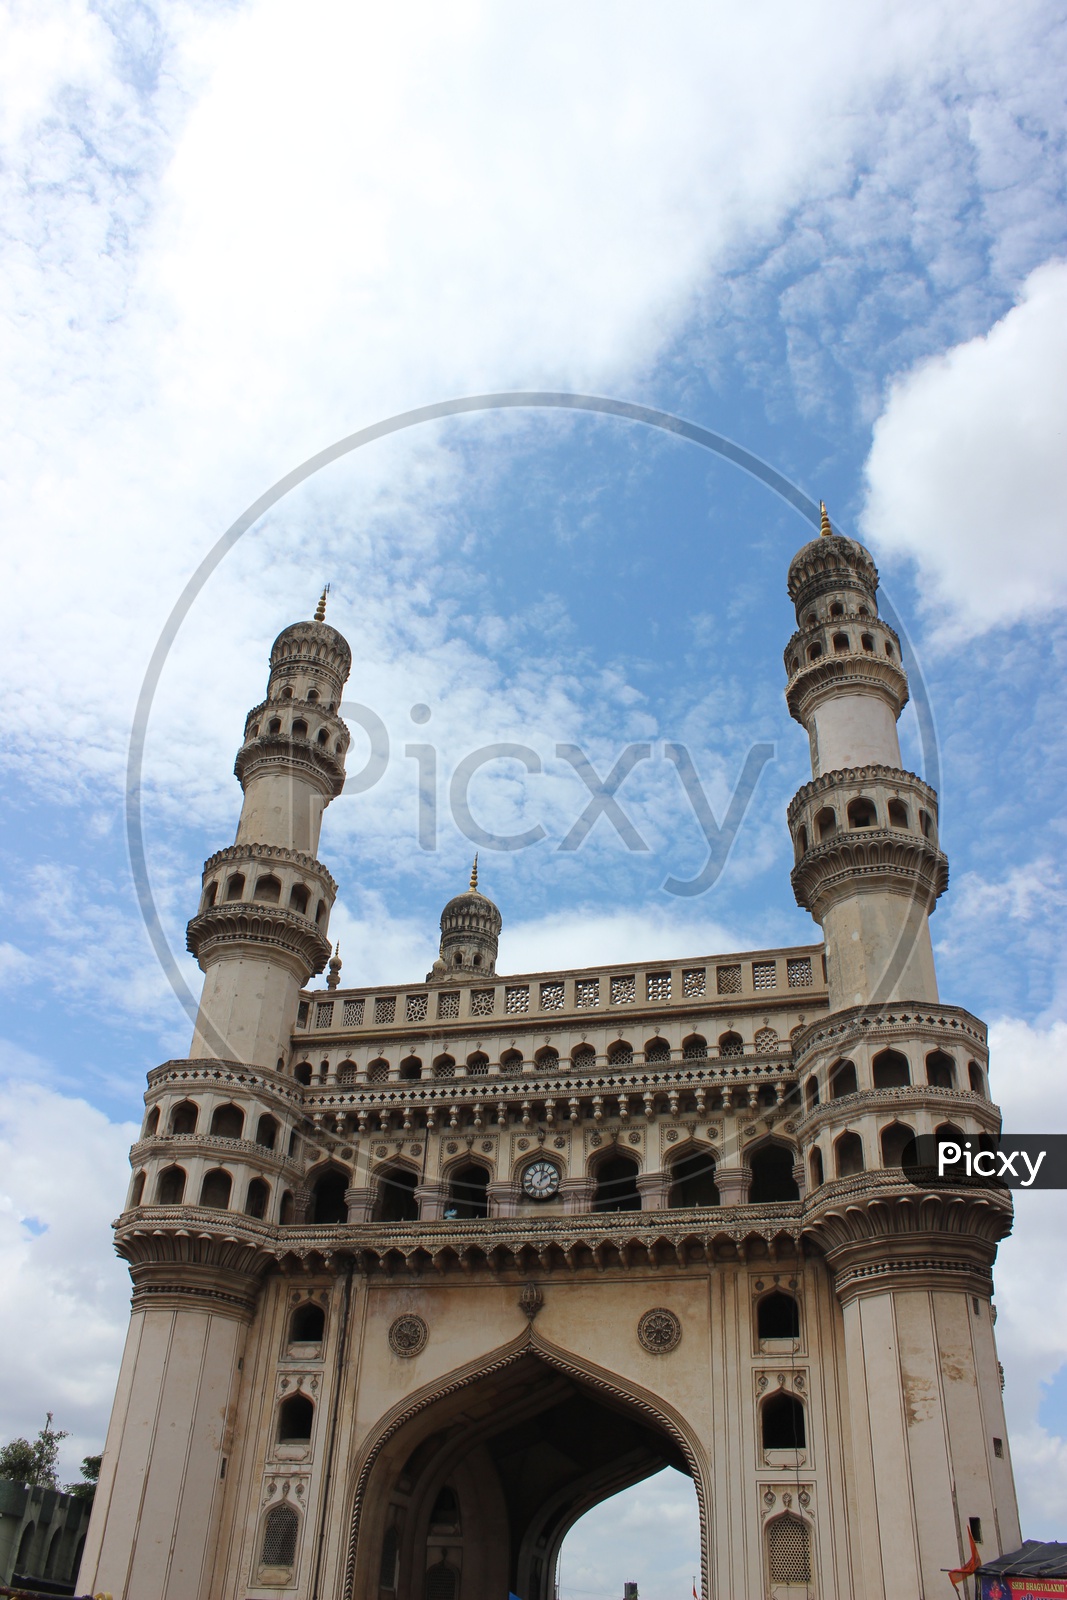 Majestic Charminar With Pillars Composition Over Blue Sky With Cotton Clouds Background